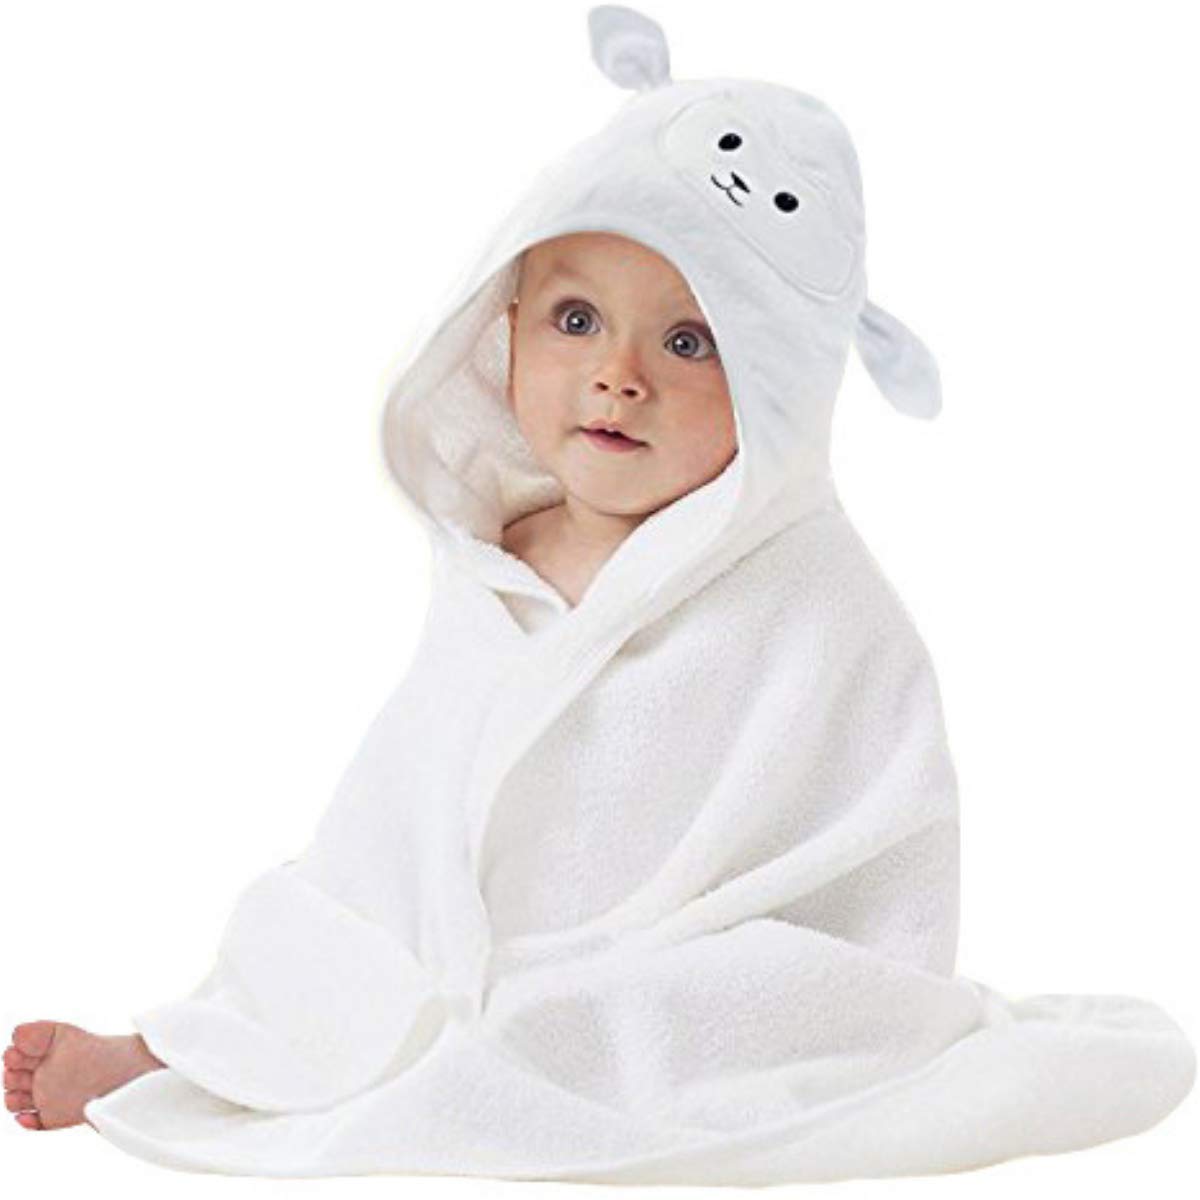 Organic Bamboo Baby Hooded Towel | Ultra Soft and Super Absorbent Toddler Hooded Bath Towel with Cute Lamb Face Design